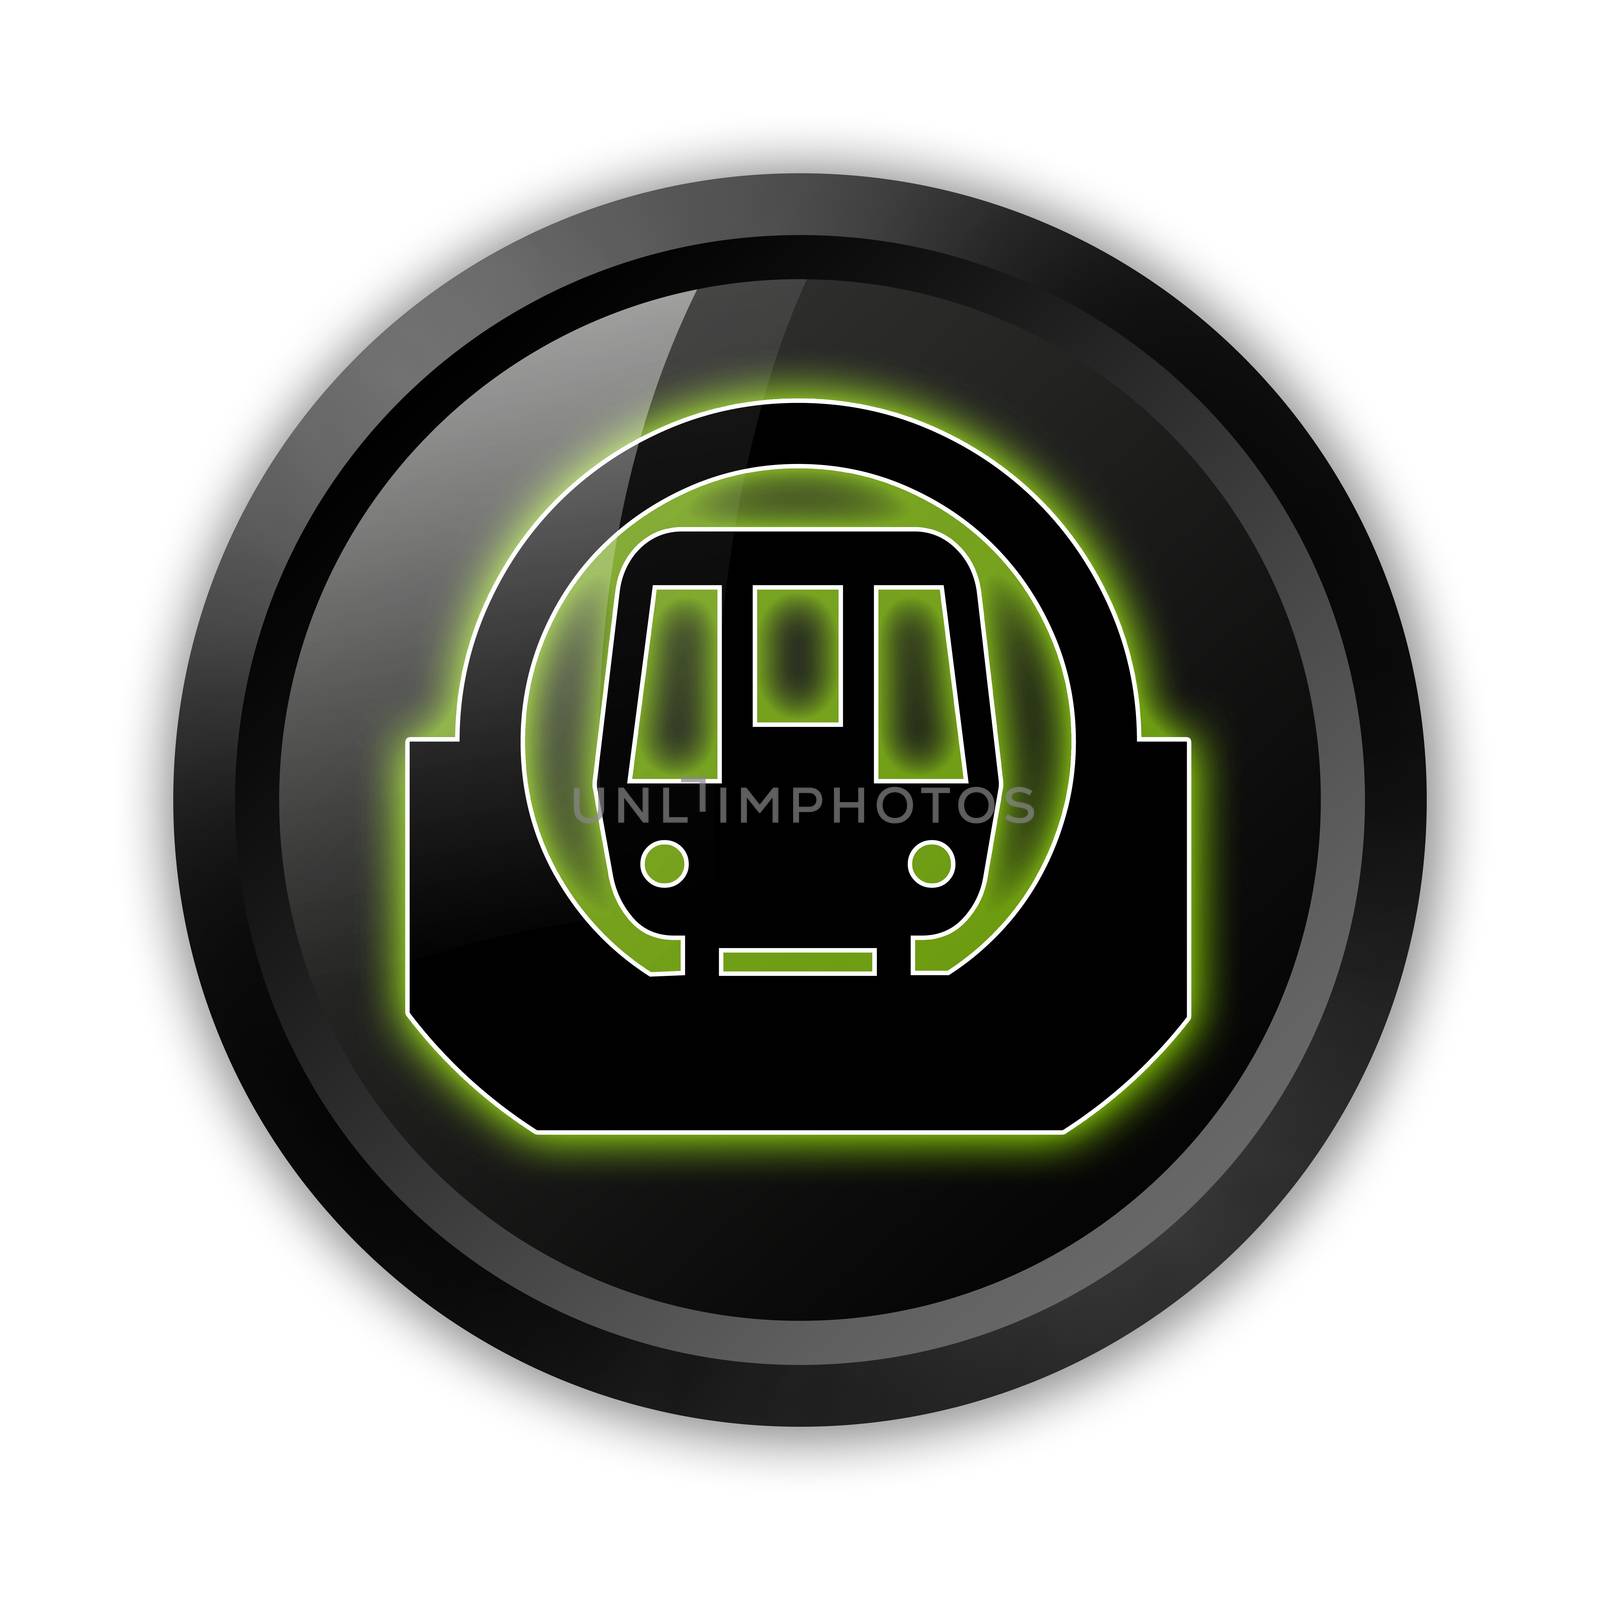 Icon, Button, Pictogram Subway by mindscanner